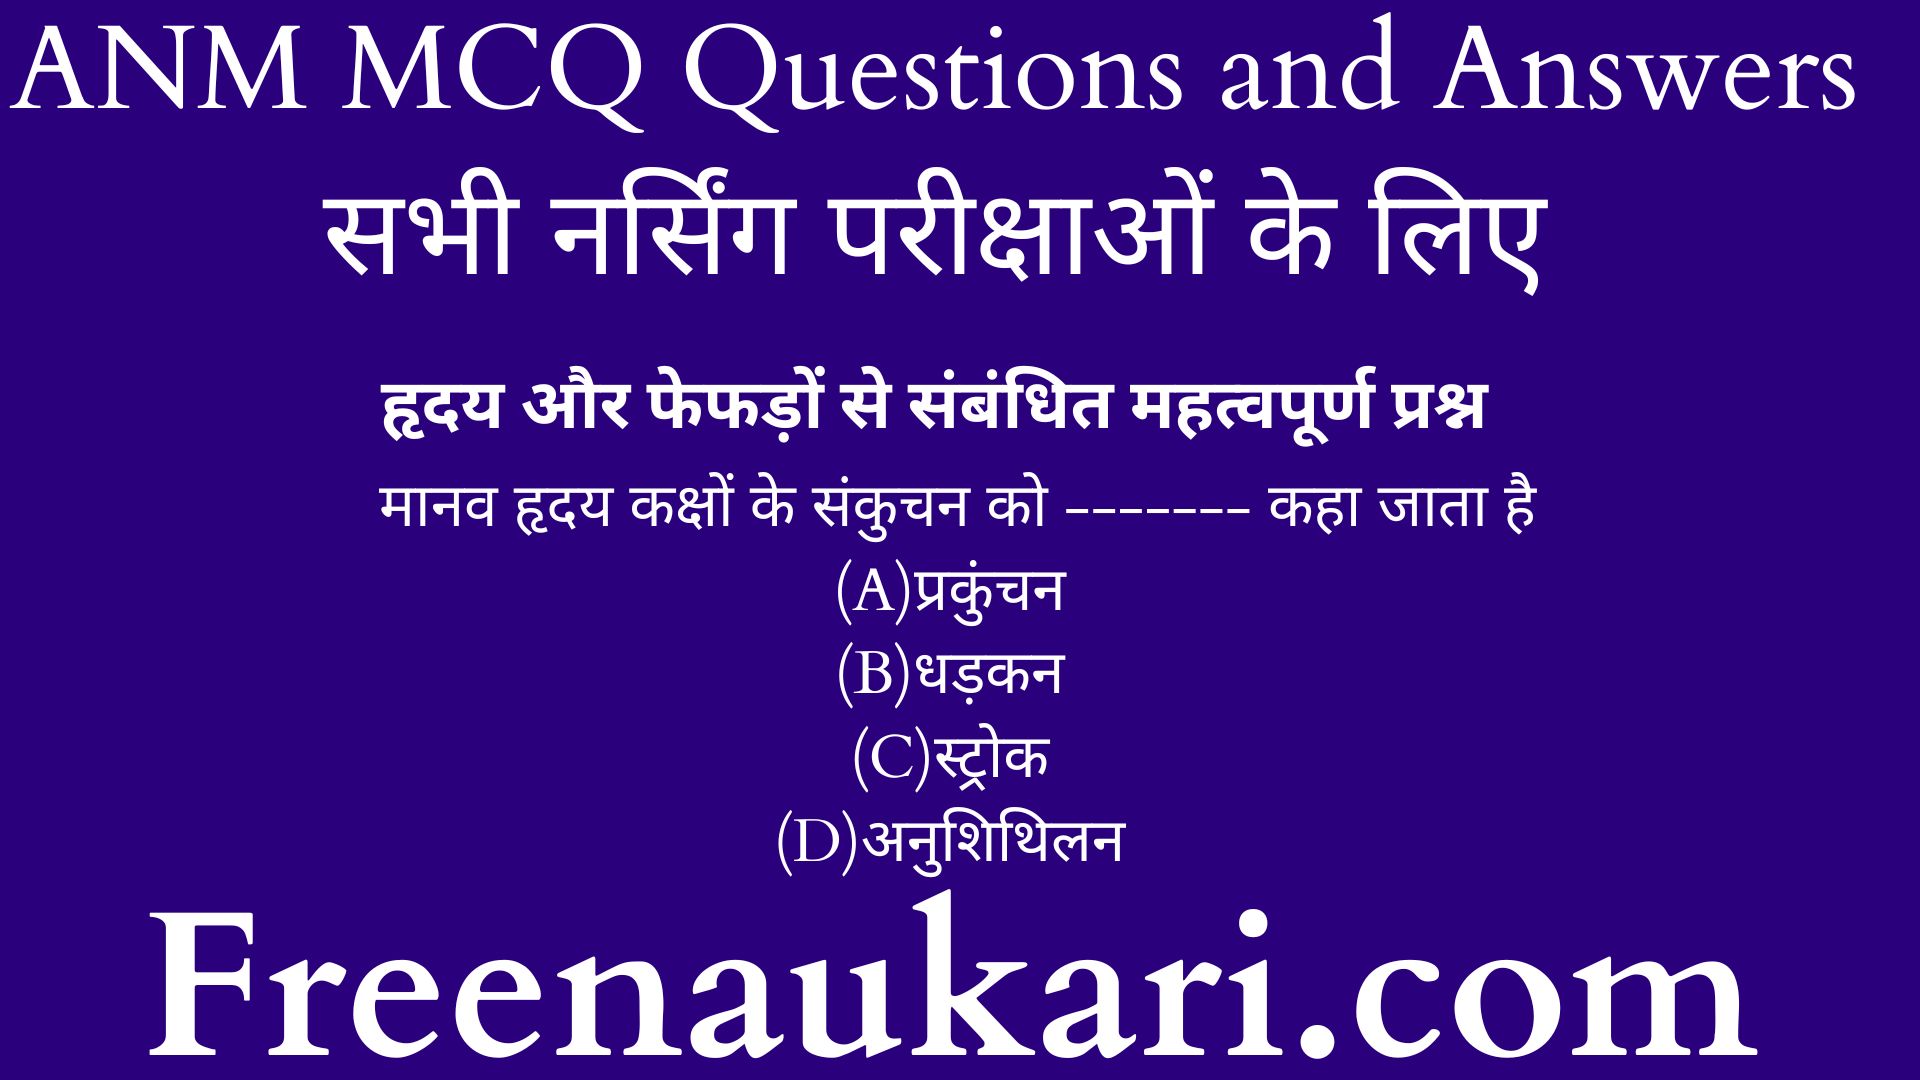 ANM MCQ Questions and Answers